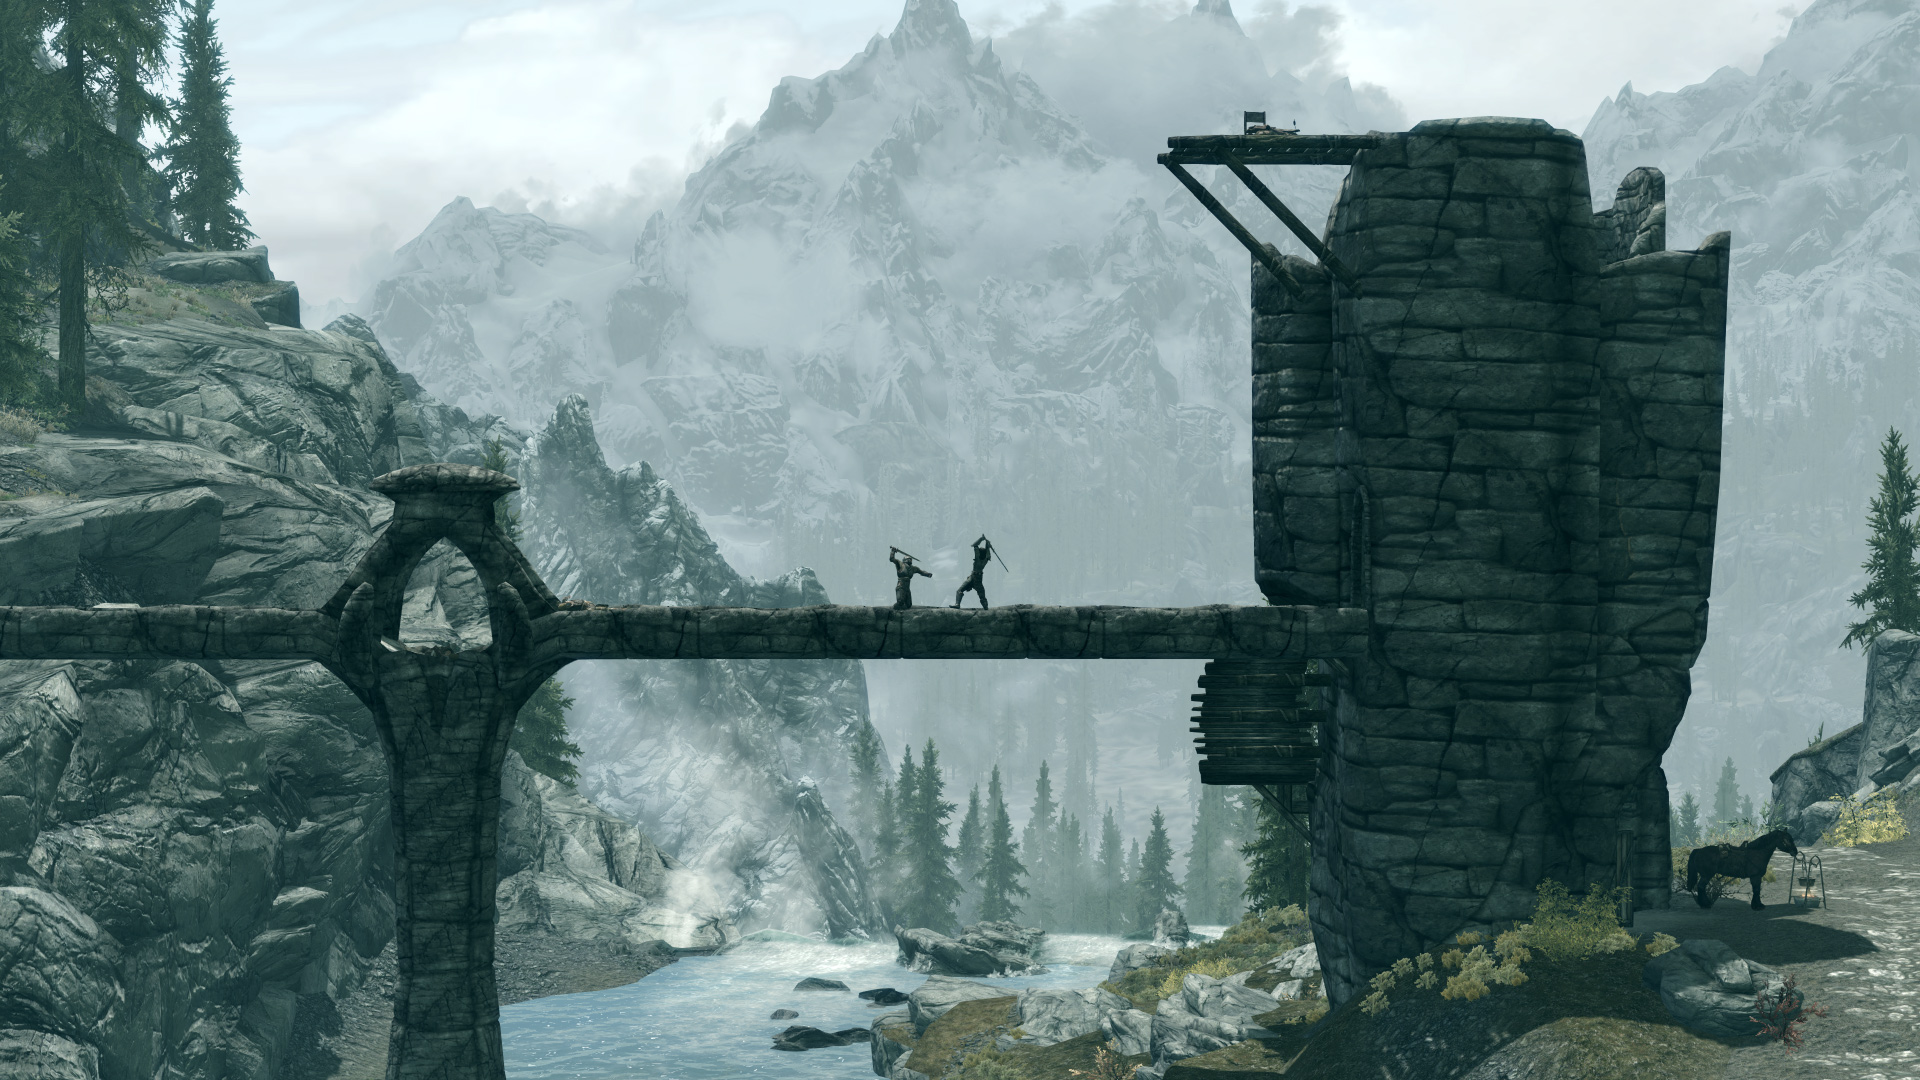 Just For You Full HD Skyrim Wallpaper Background Oh How I Loved